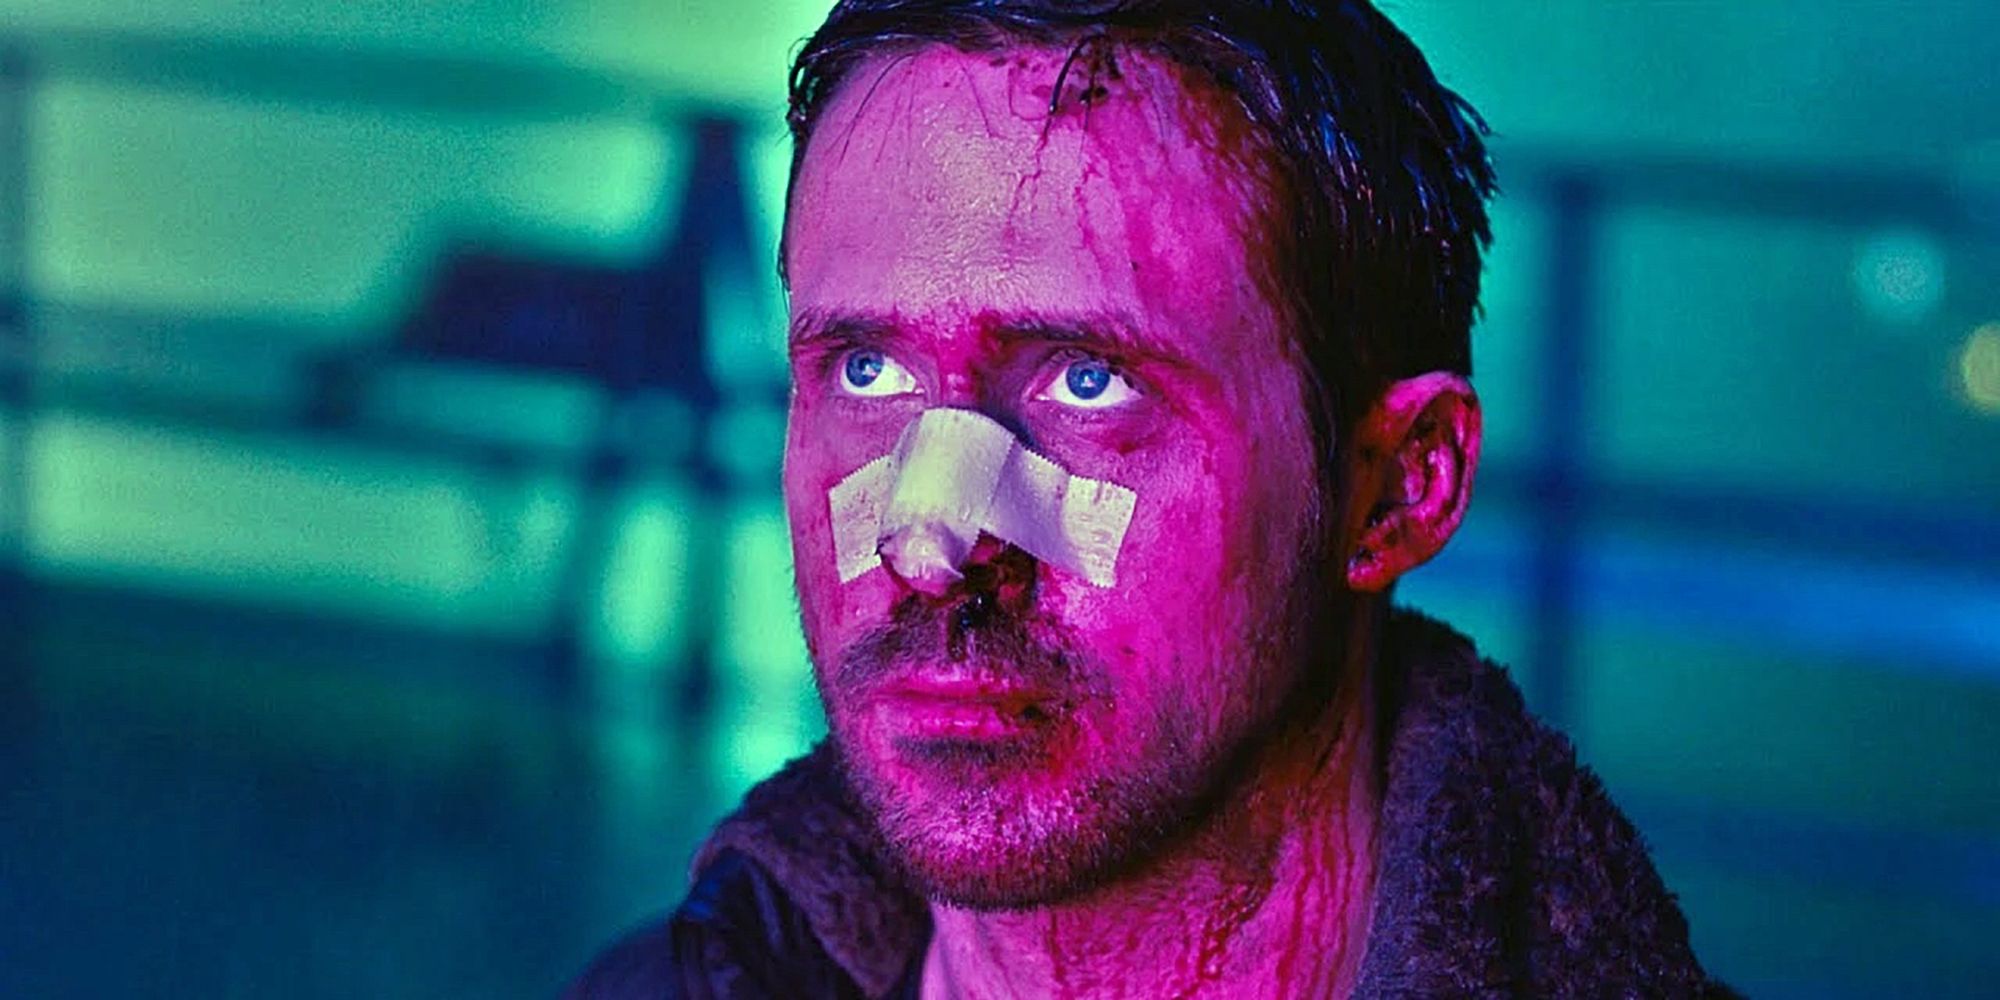 Like its predecessor, 'Blade Runner 2049' struggled at the box office despite very favorable reviews